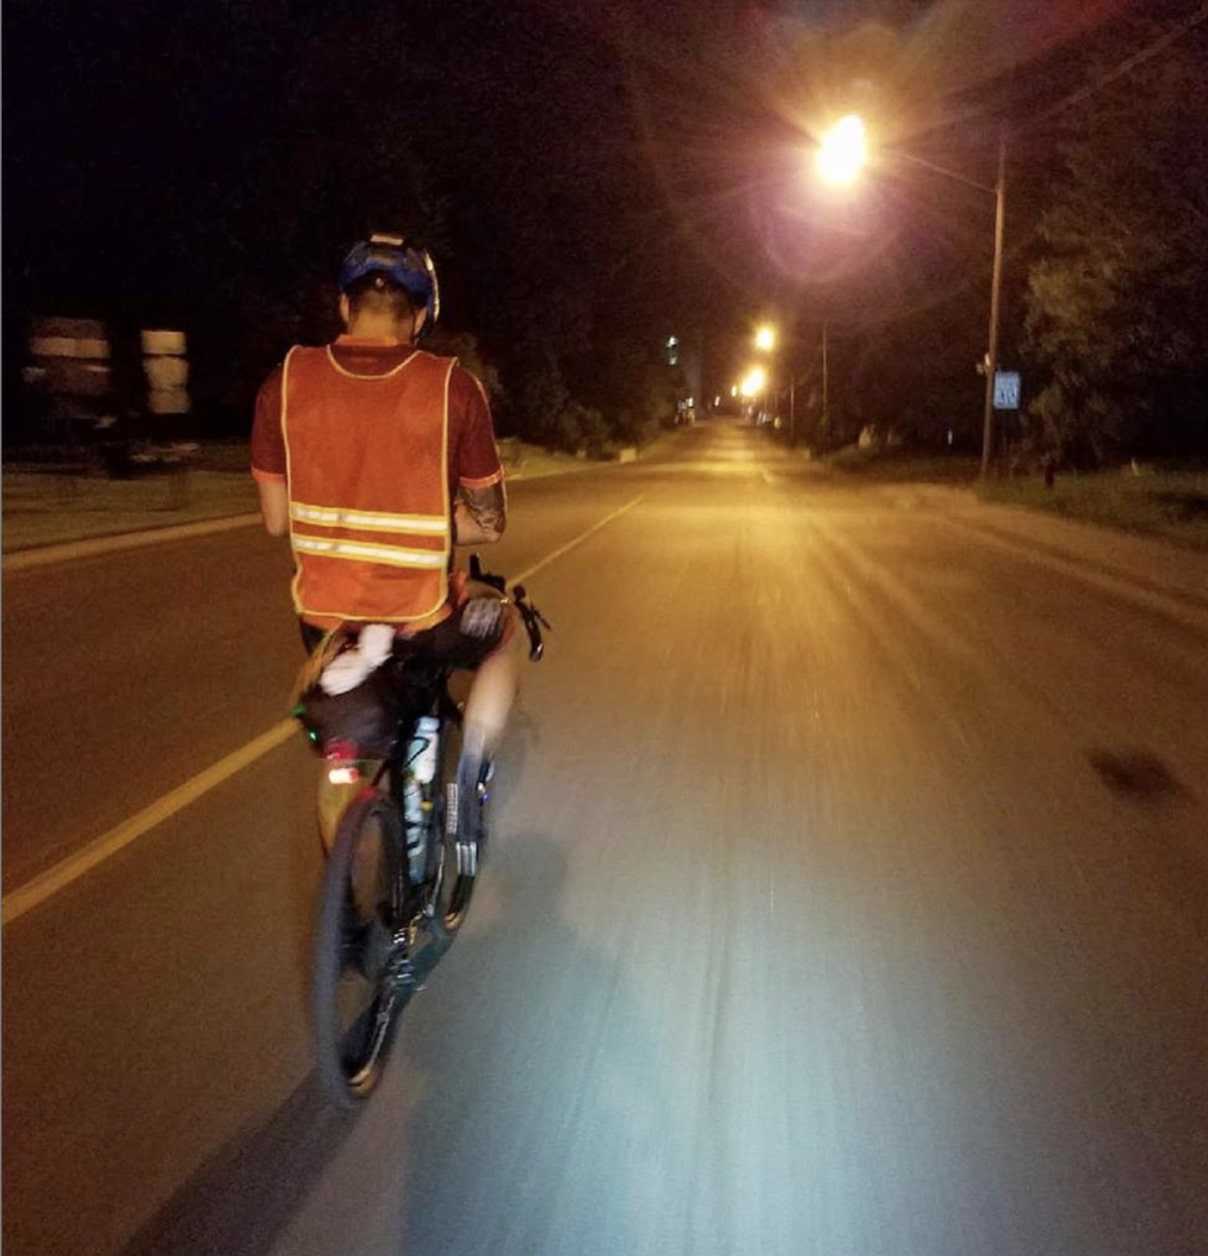 Cyclist wears a reflective vest while riding a bike down a city street at night under the street lights